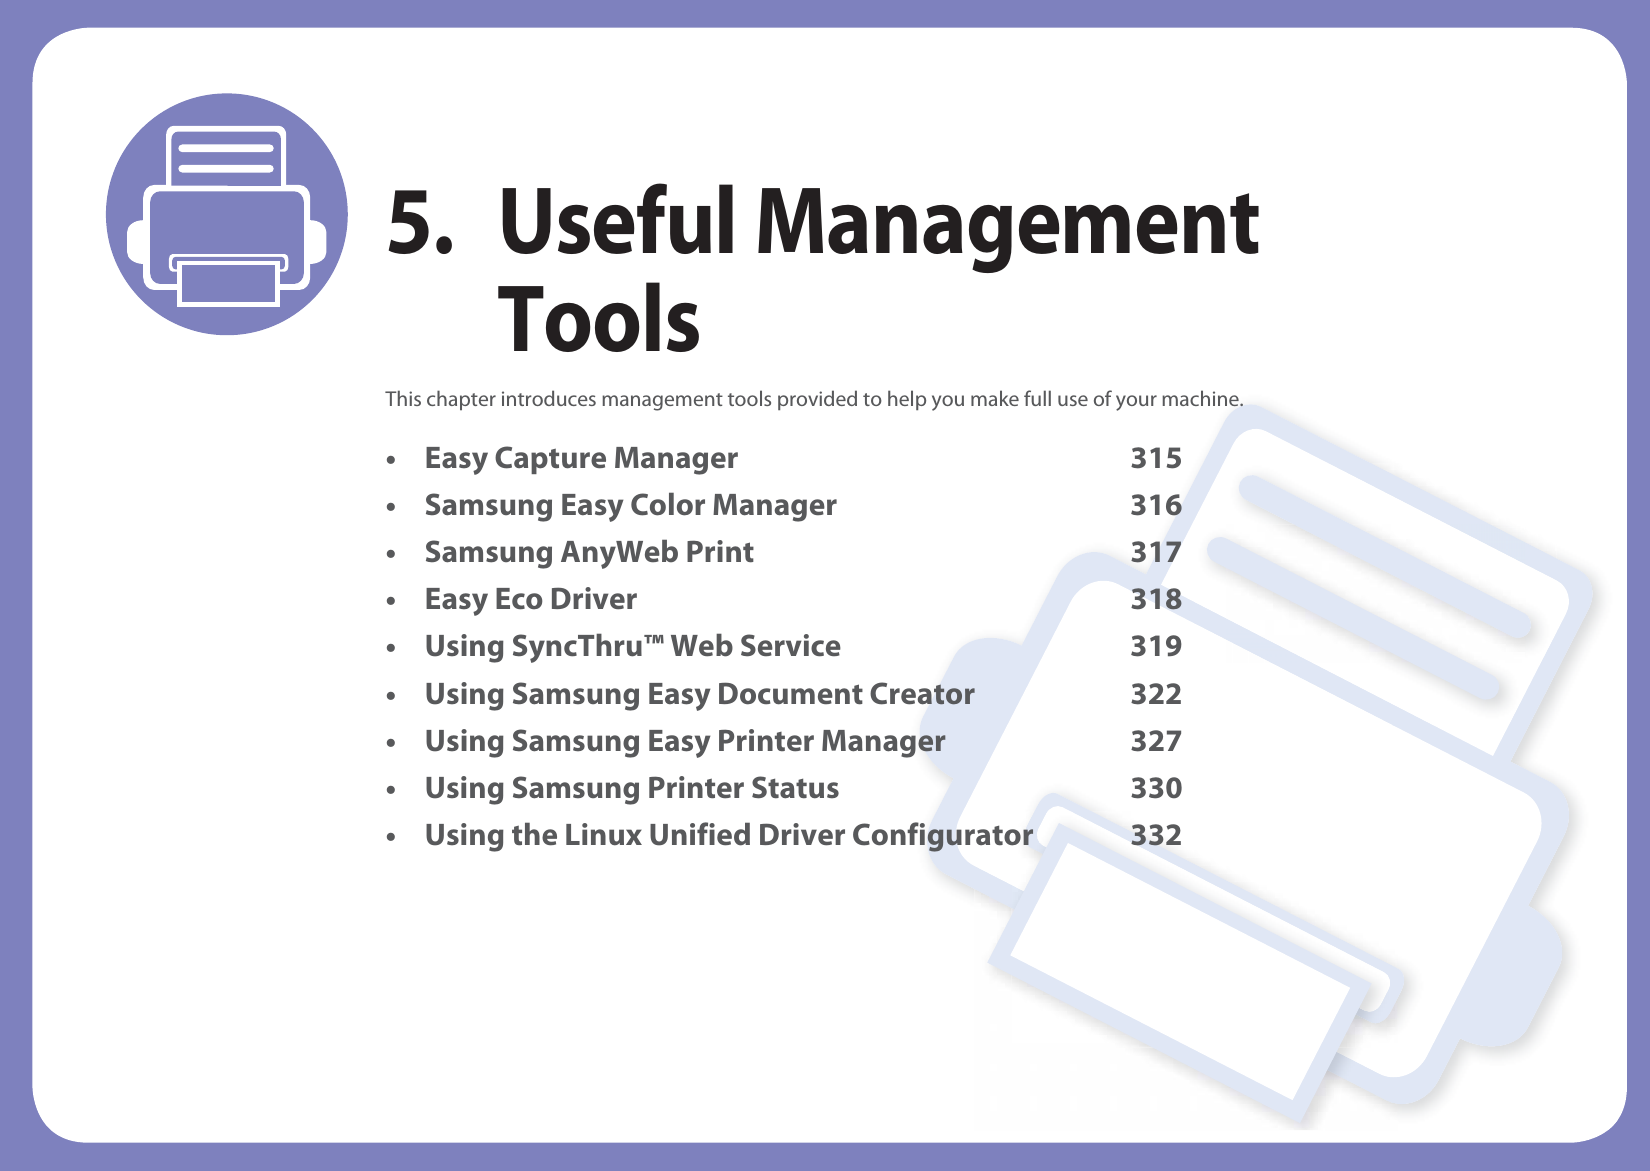 5. Useful Management ToolsThis chapter introduces management tools provided to help you make full use of your machine. • Easy Capture Manager 315• Samsung Easy Color Manager 316• Samsung AnyWeb Print 317• Easy Eco Driver 318• Using SyncThru™ Web Service 319• Using Samsung Easy Document Creator 322• Using Samsung Easy Printer Manager 327• Using Samsung Printer Status 330• Using the Linux Unified Driver Configurator 332